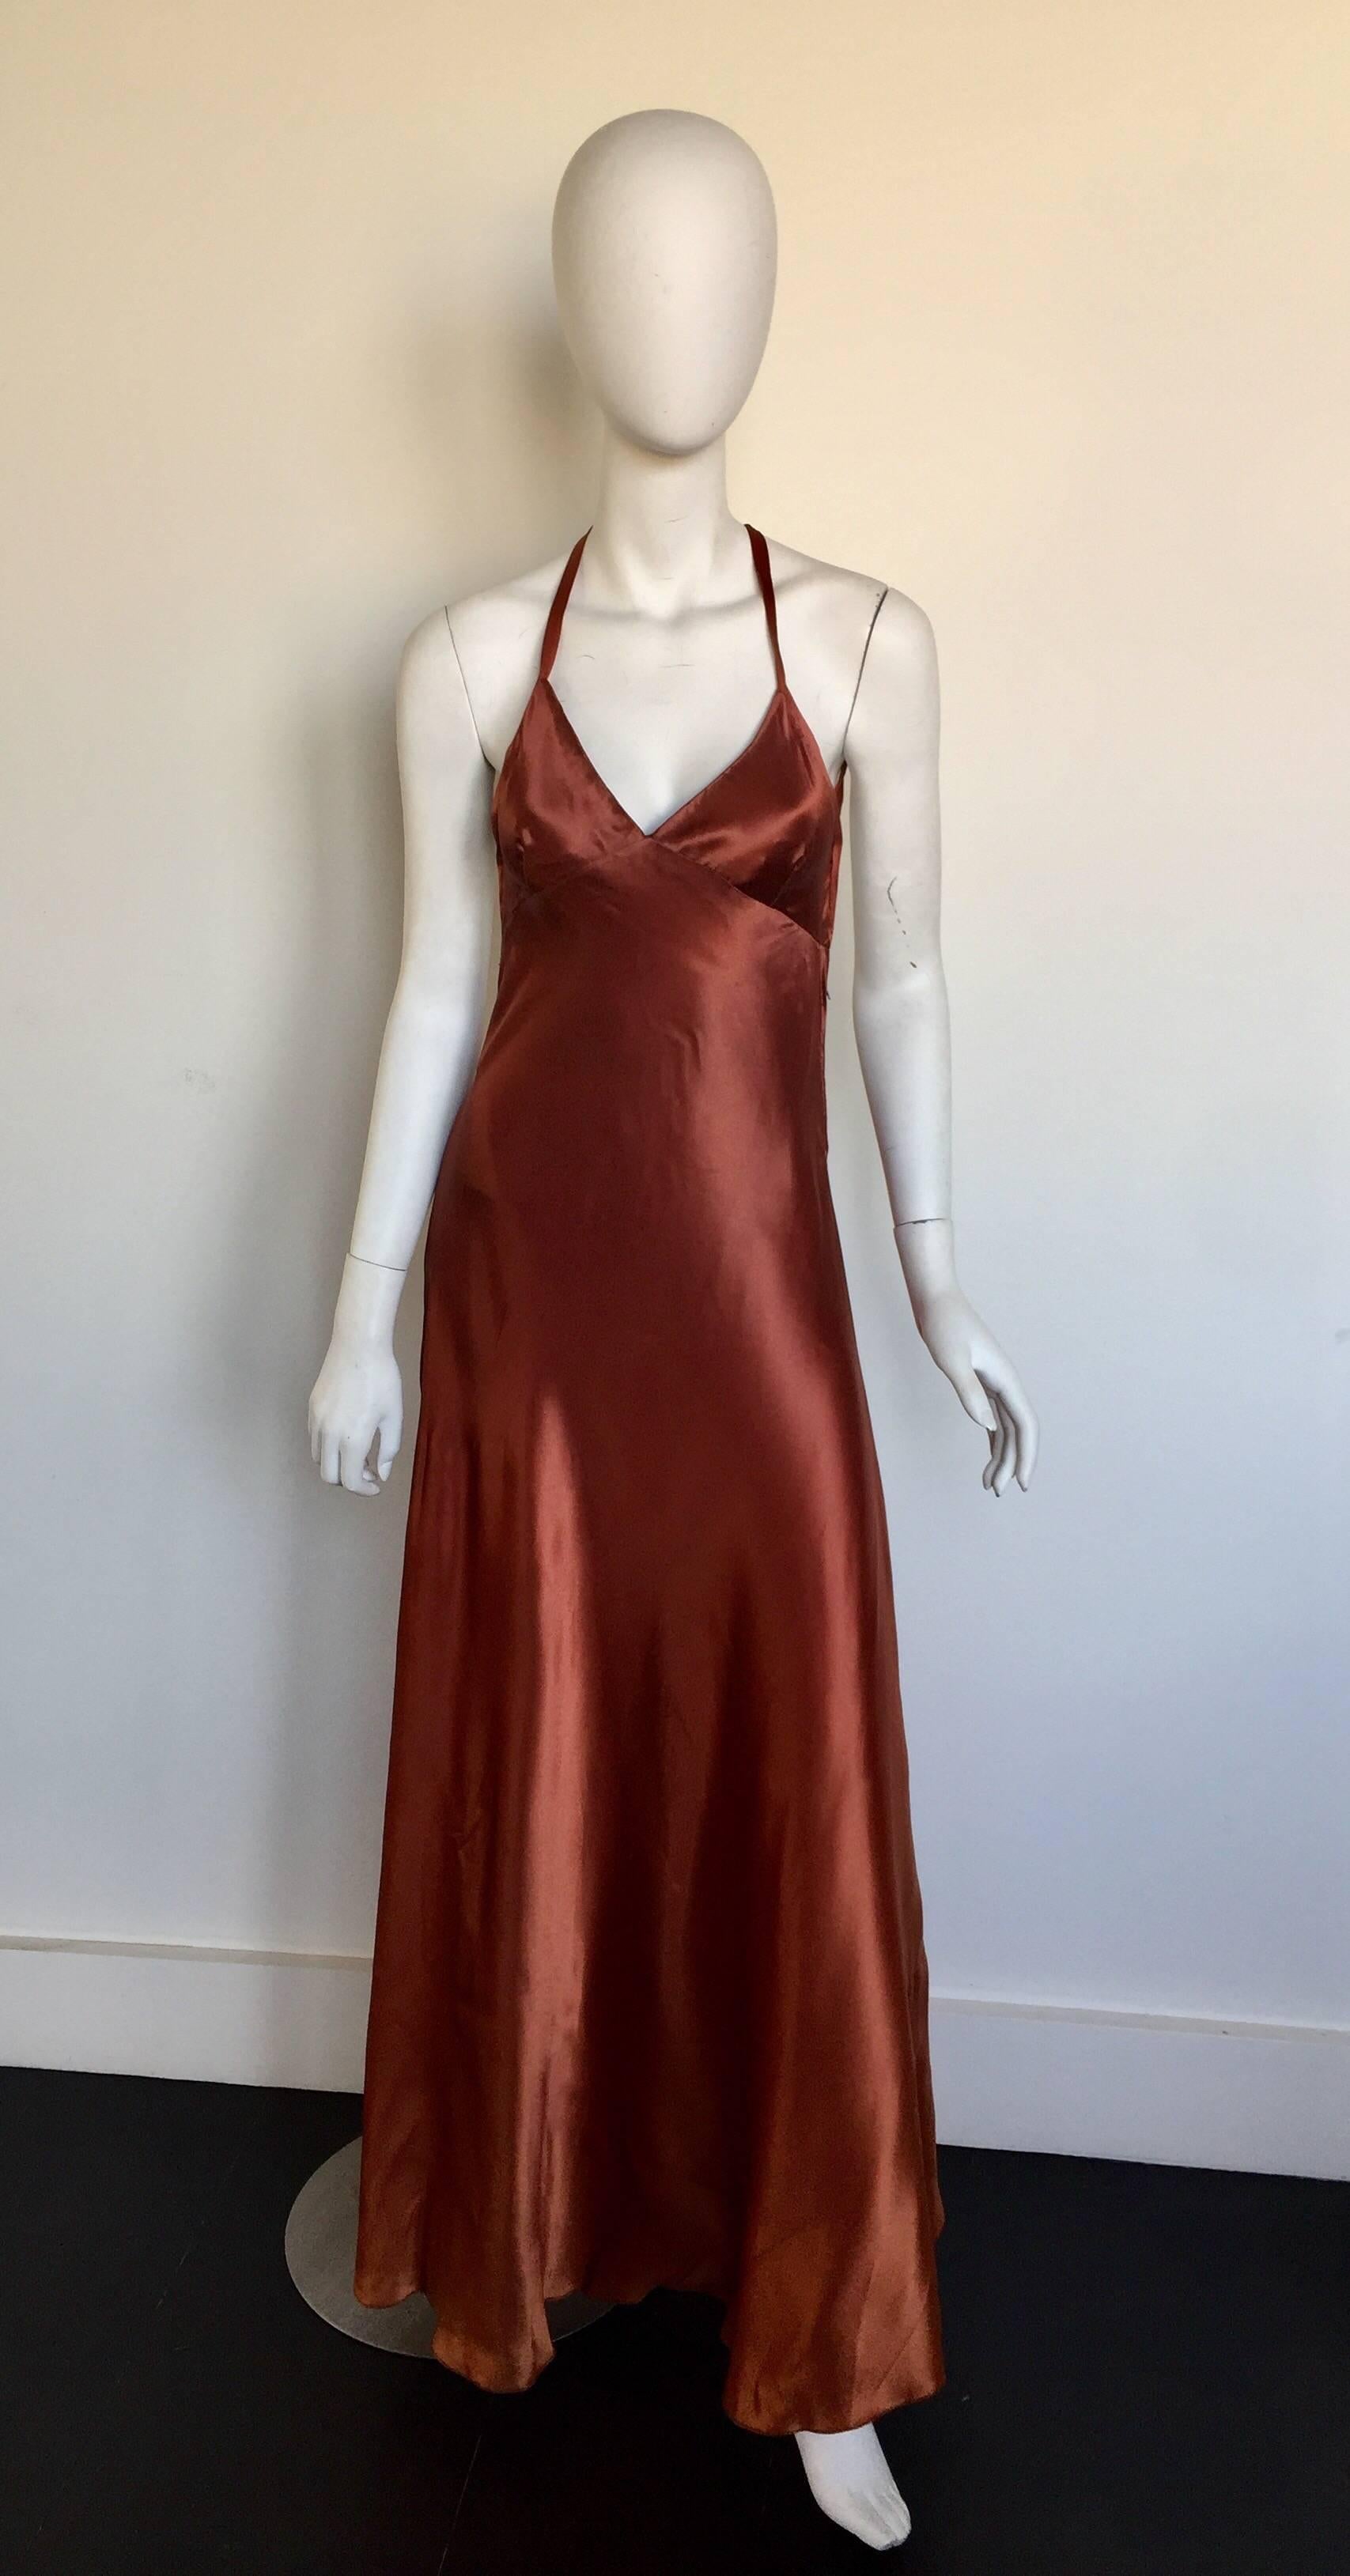 This is a stunning 1970s silk slip dress with a slight ombre effect and a bias cut skirt.  It is in good condiontion except for the inside lining looks a little unfinished.  It is a custom piece from a NY atelier and fits a 2-4 but please check